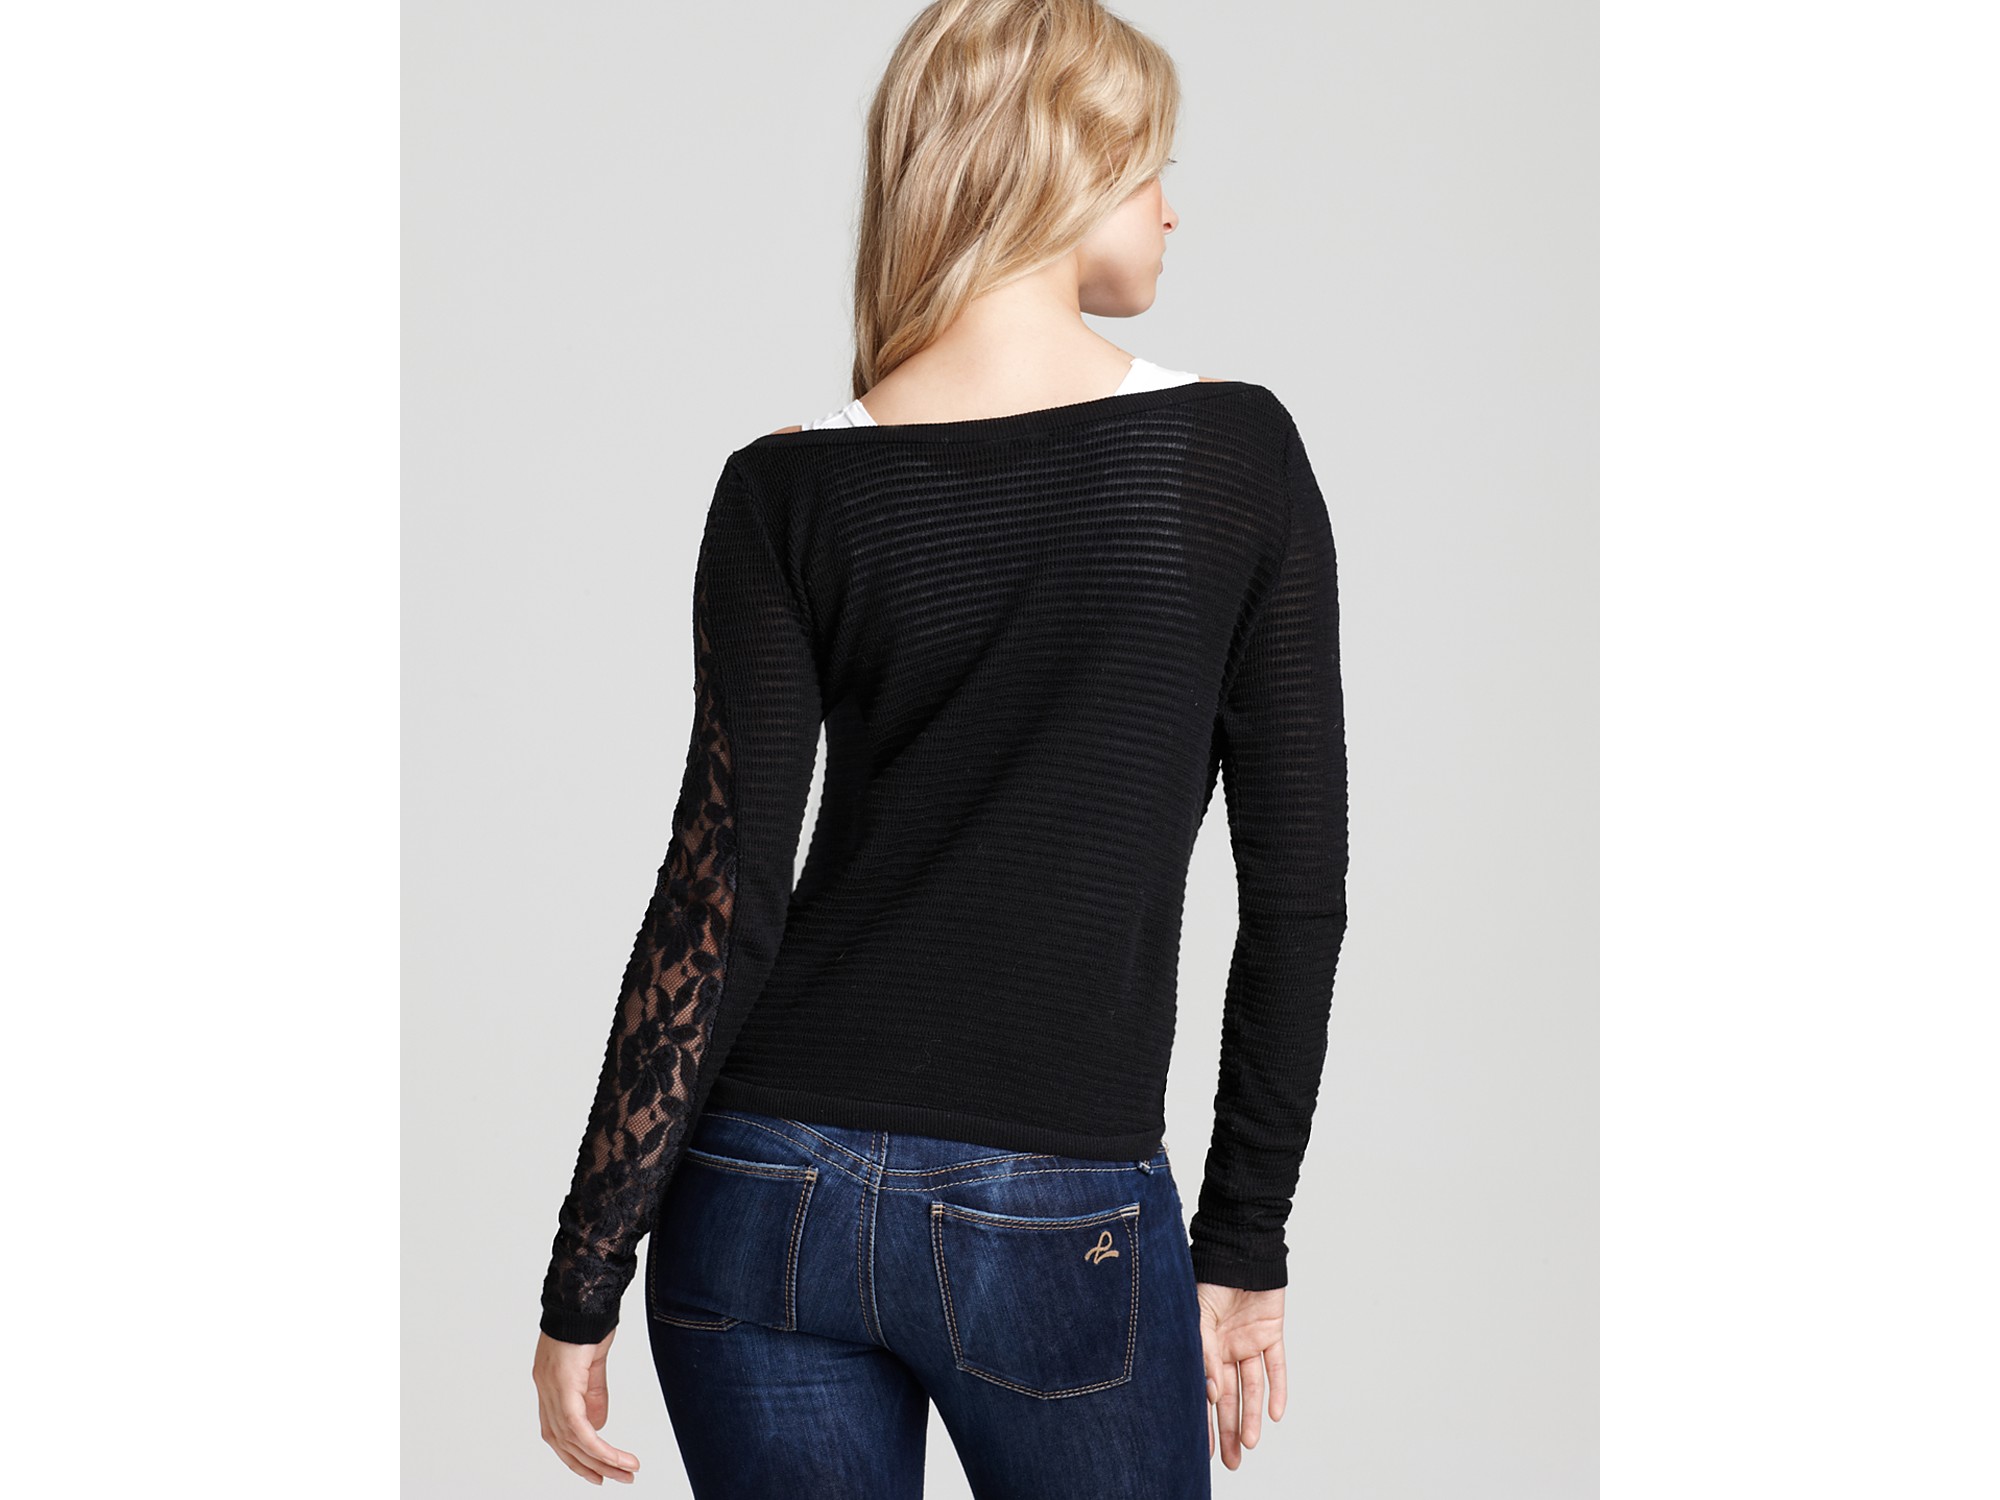 Lyst - Free People Fuzzy Lace Sleeve Sweater in Black